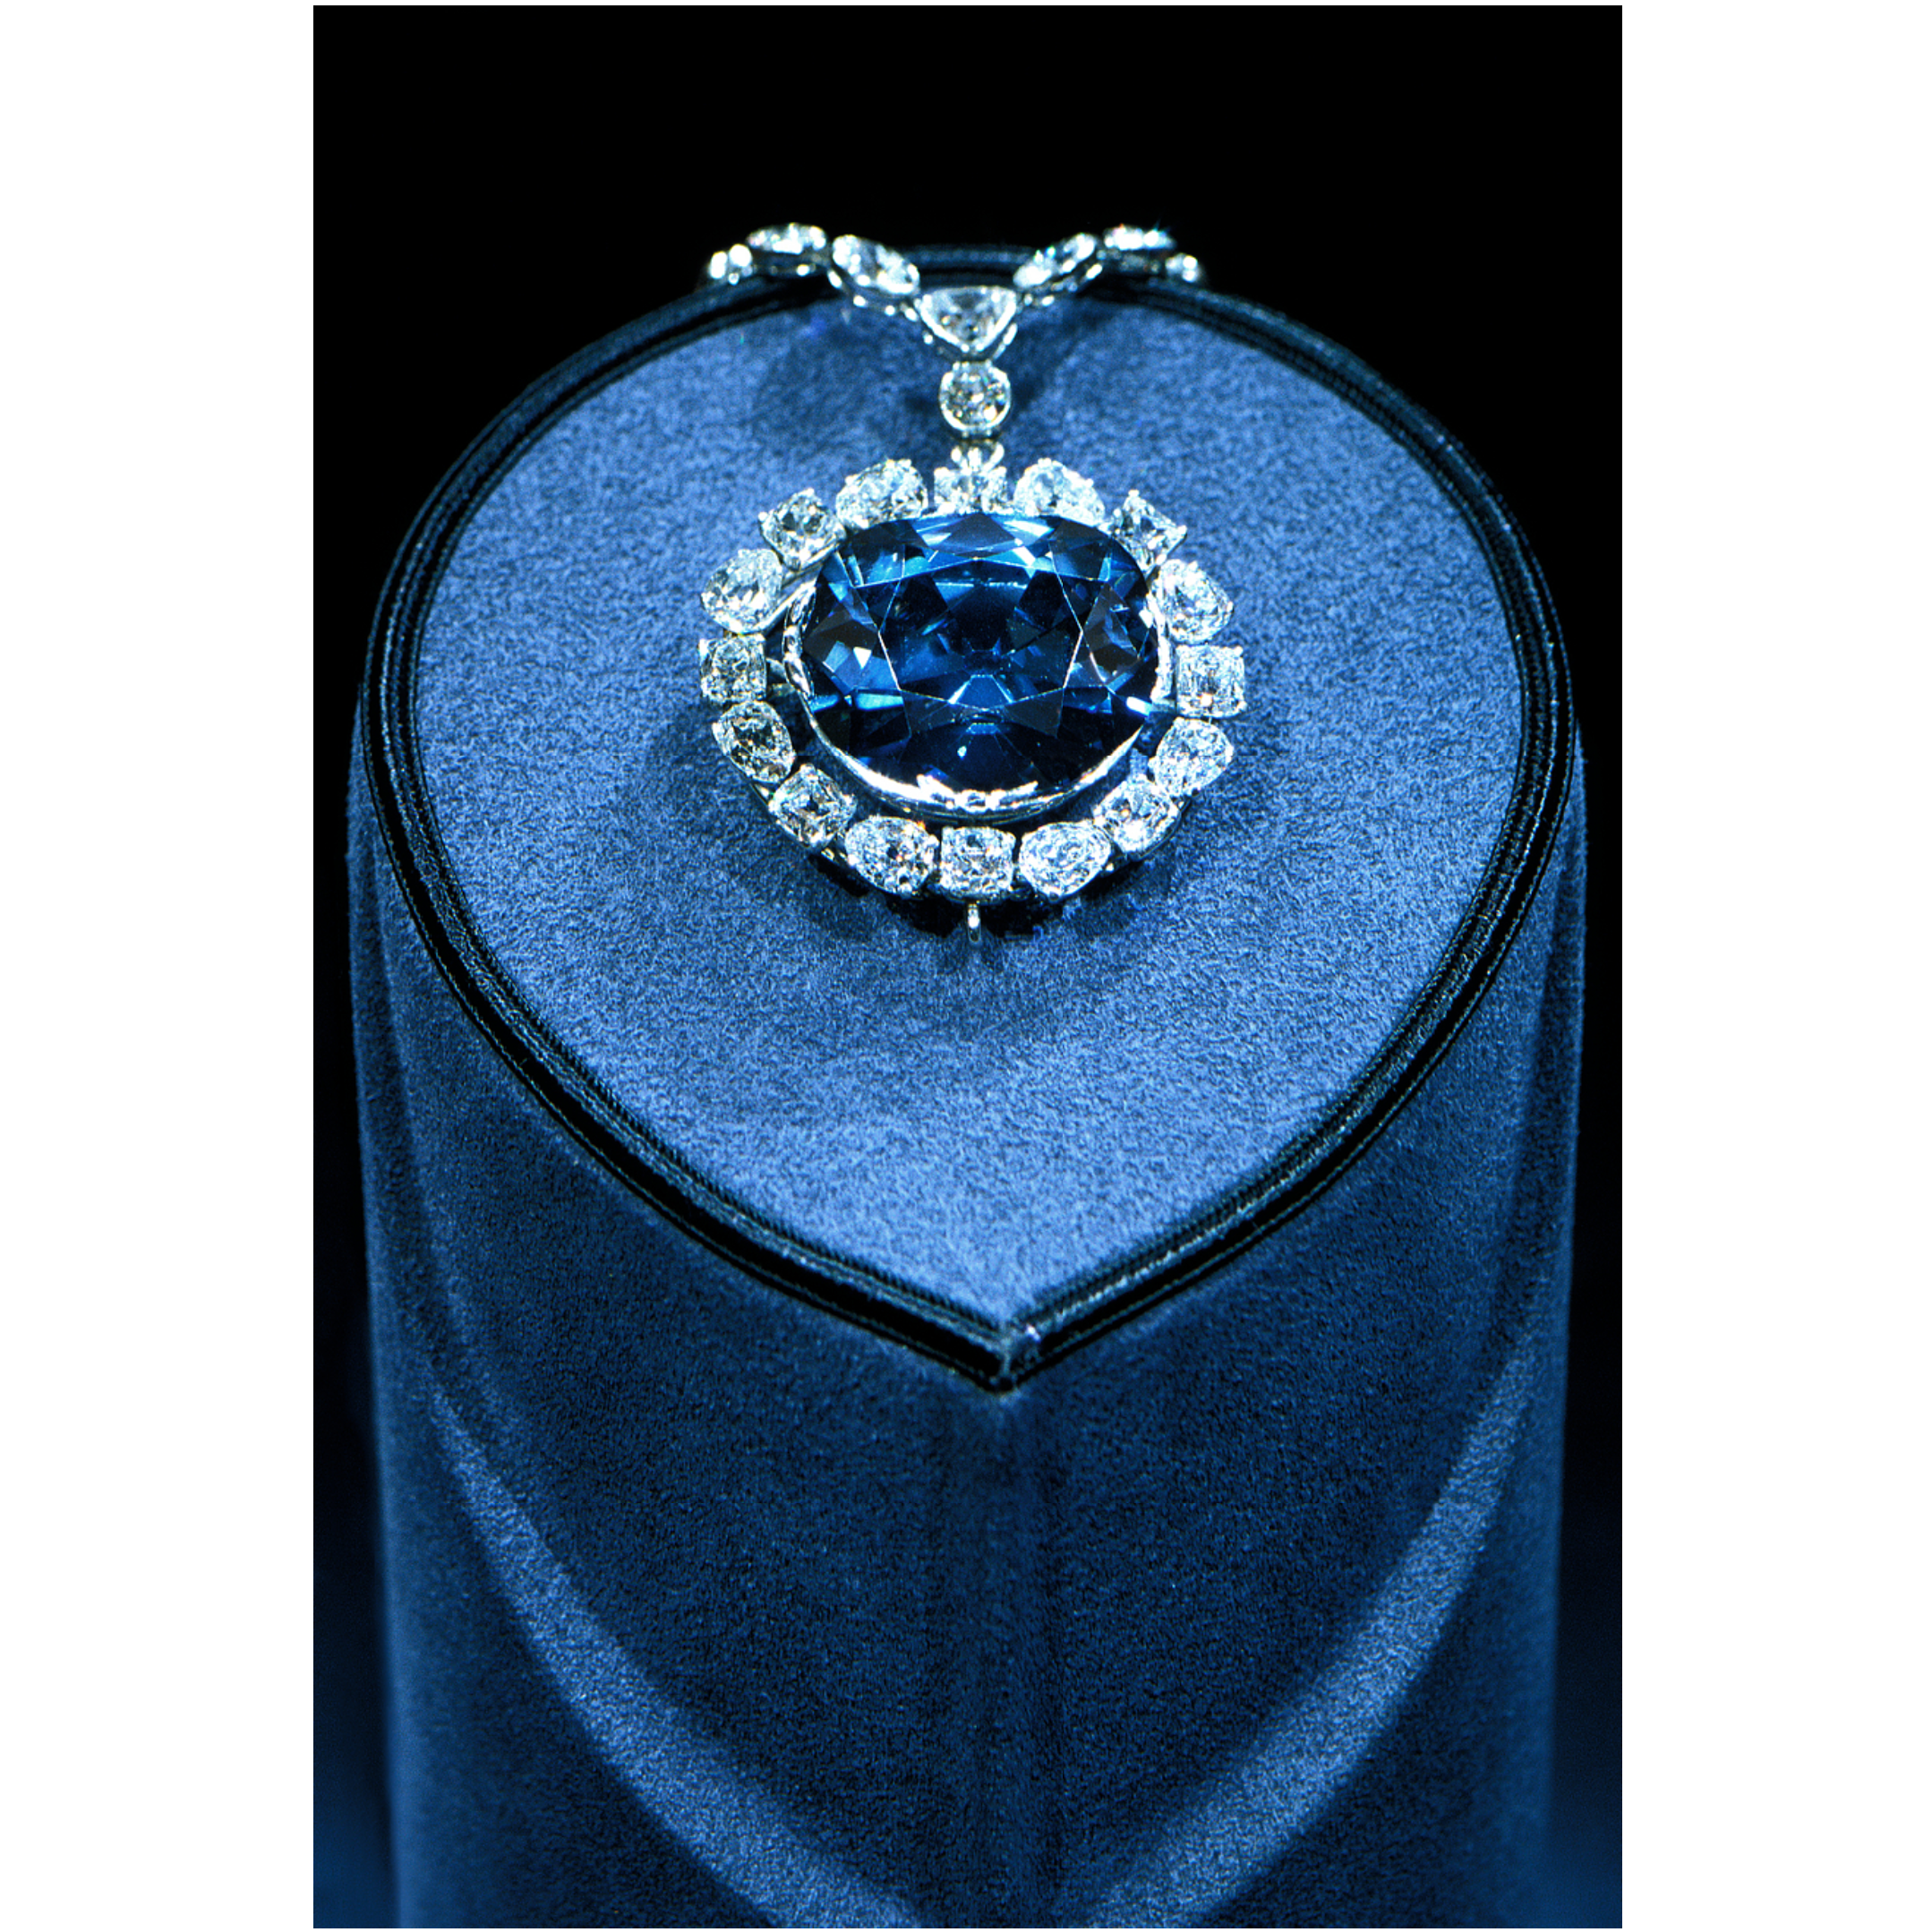 Smithsonian Collection: The Hope Diamond